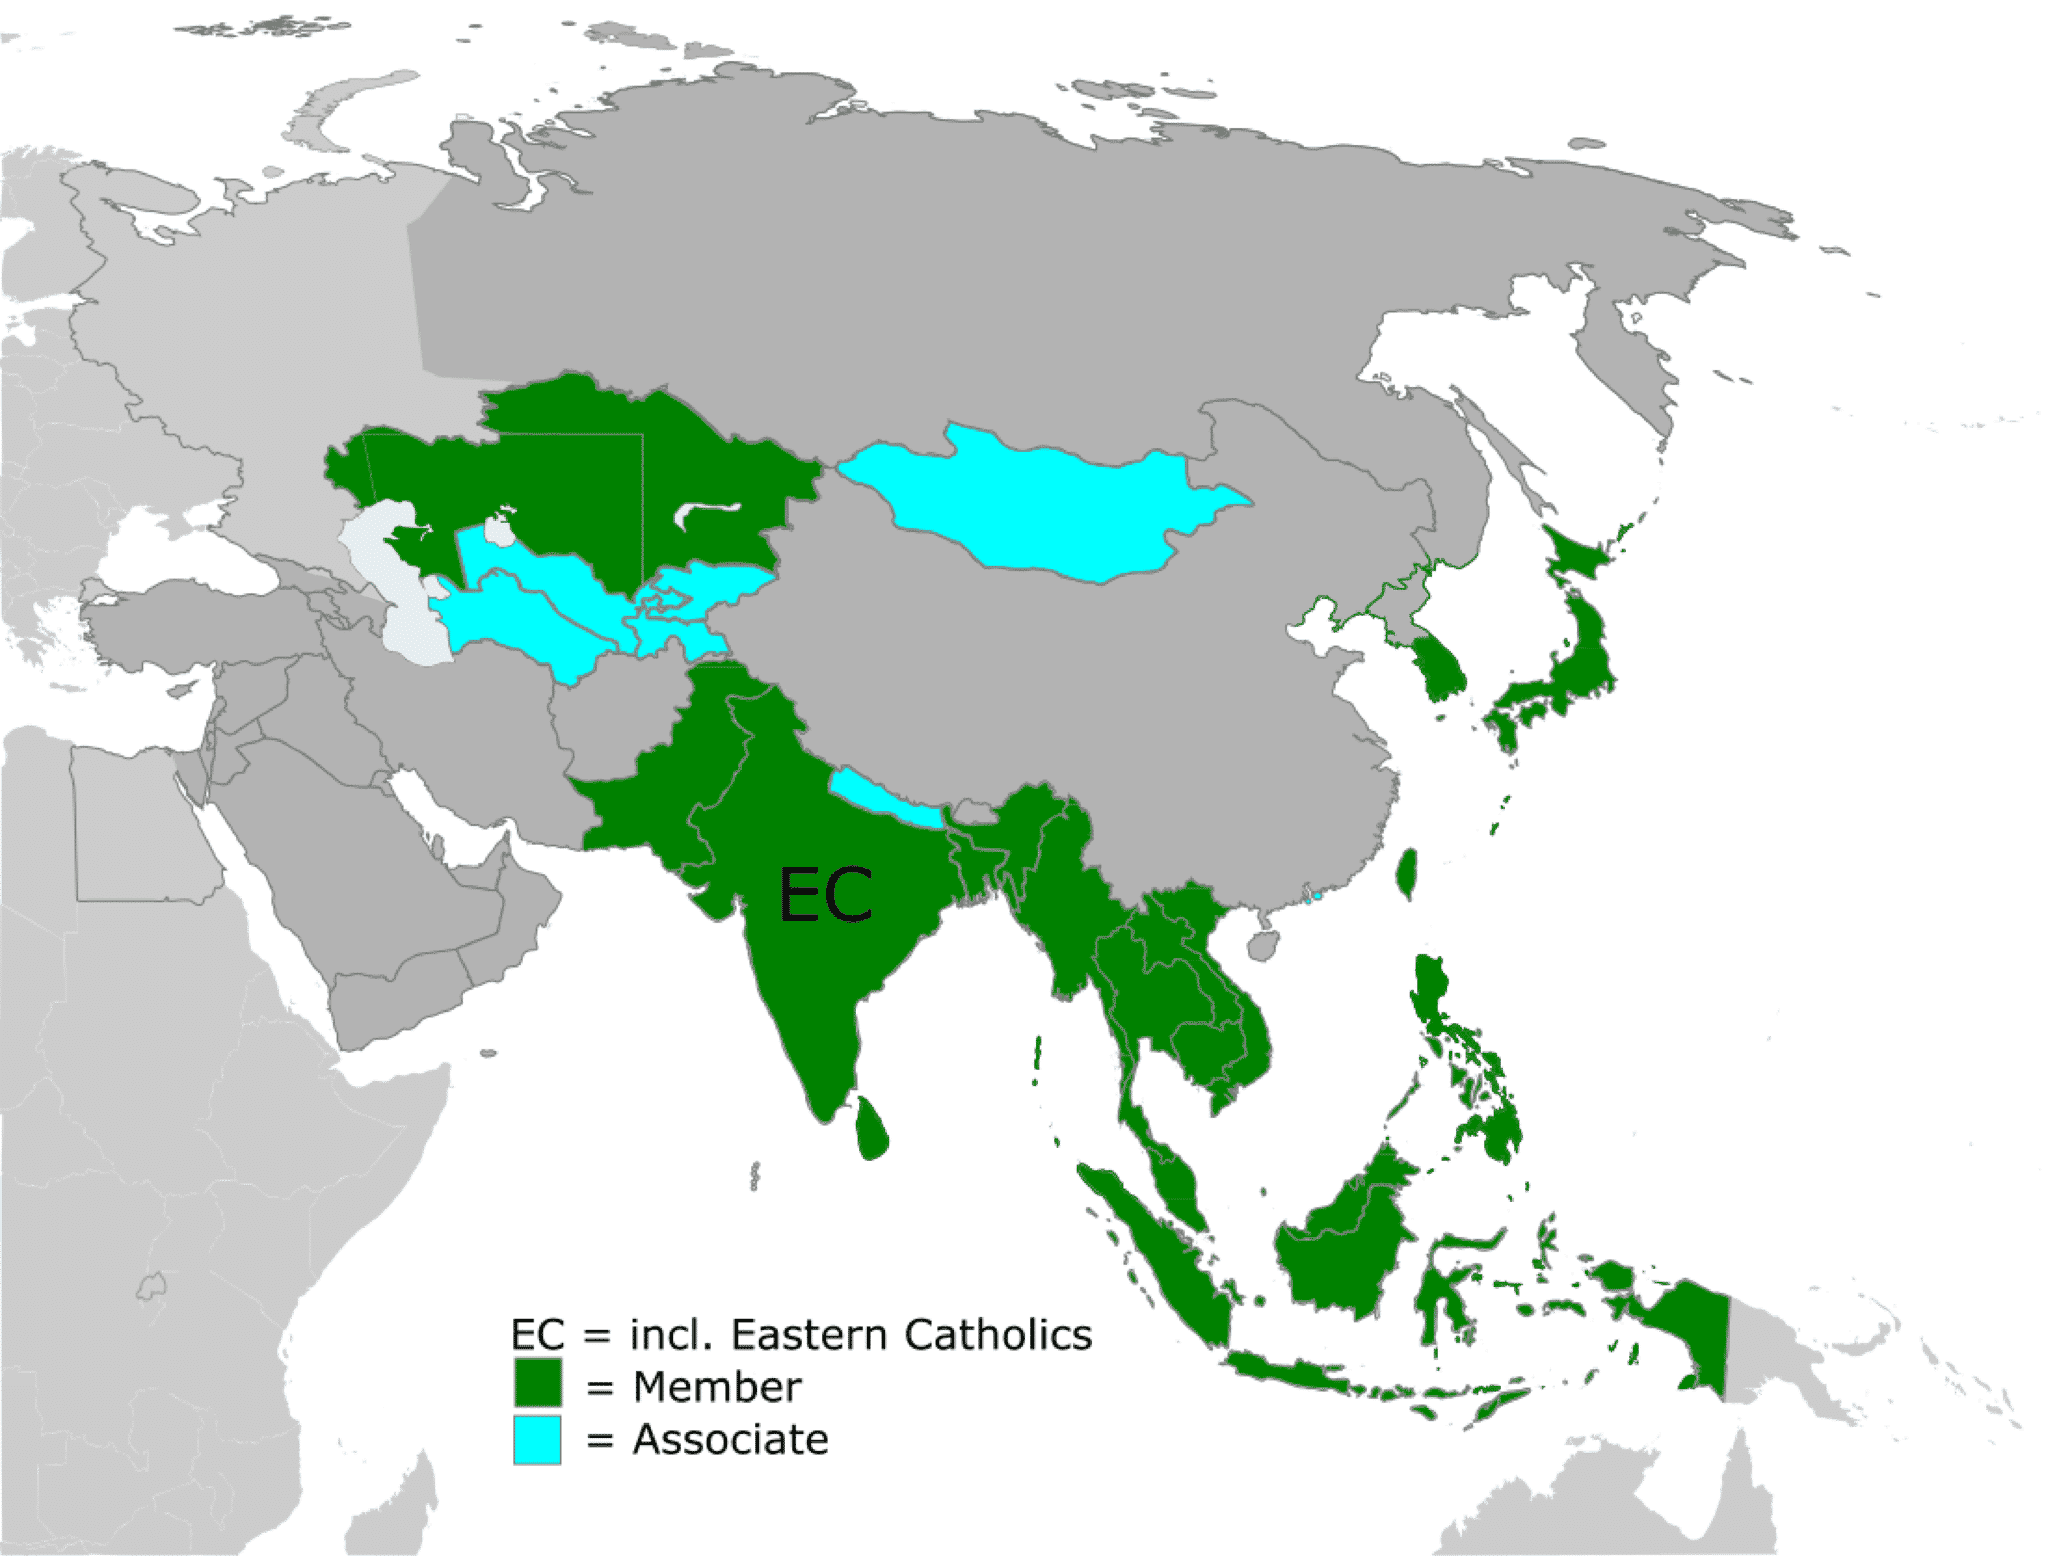 Map showing locations of Member Bishop's Conferences which are full members of the Federation of Asian Bishops' Conferences (FABC) together with Associate Members (Dioceses, Apostolic Prefectures, Apostolic Vicariates, Apostolic Administrations and Apostolic Nuncitures). Graphic: Ggdivhjkjl/Wikimedia Commons, Public Domain